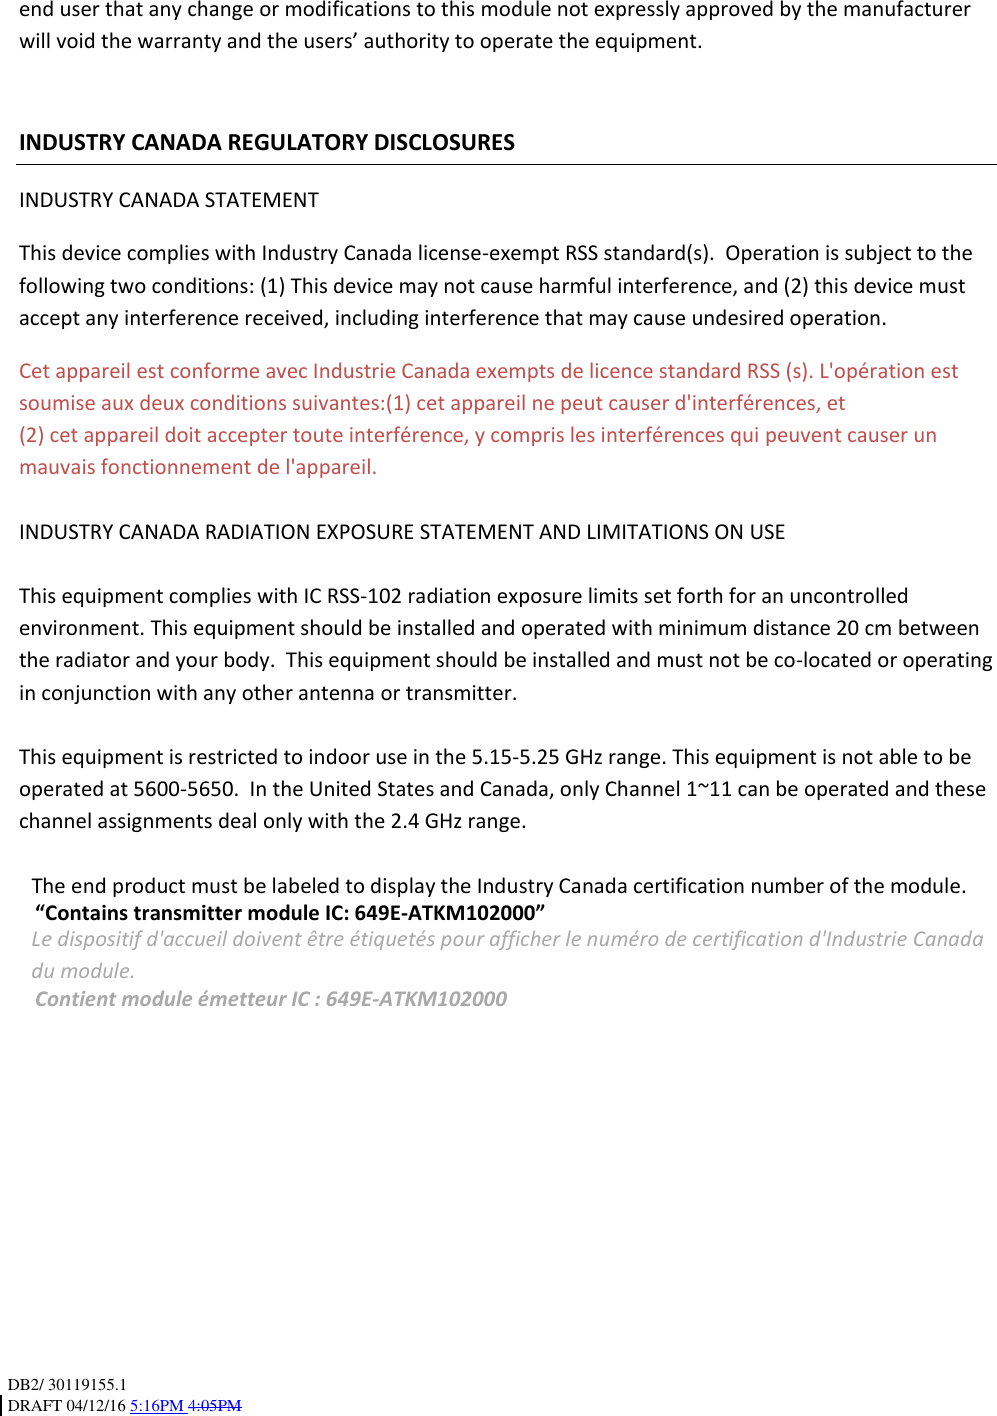 DB2/ 30119155.1 DRAFT 04/12/16 5:16PM 4:05PM   end user that any change or modifications to this module not expressly approved by the manufacturer will void the warranty and the users’ authority to operate the equipment.    INDUSTRY CANADA REGULATORY DISCLOSURES INDUSTRY CANADA STATEMENT This device complies with Industry Canada license-exempt RSS standard(s).  Operation is subject to the following two conditions: (1) This device may not cause harmful interference, and (2) this device must accept any interference received, including interference that may cause undesired operation. Cet appareil est conforme avec Industrie Canada exempts de licence standard RSS (s). L&apos;opération est soumise aux deux conditions suivantes:(1) cet appareil ne peut causer d&apos;interférences, et (2) cet appareil doit accepter toute interférence, y compris les interférences qui peuvent causer un mauvais fonctionnement de l&apos;appareil.  INDUSTRY CANADA RADIATION EXPOSURE STATEMENT AND LIMITATIONS ON USE  This equipment complies with IC RSS-102 radiation exposure limits set forth for an uncontrolled environment. This equipment should be installed and operated with minimum distance 20 cm between the radiator and your body.  This equipment should be installed and must not be co-located or operating in conjunction with any other antenna or transmitter.  This equipment is restricted to indoor use in the 5.15-5.25 GHz range. This equipment is not able to be operated at 5600-5650.  In the United States and Canada, only Channel 1~11 can be operated and these channel assignments deal only with the 2.4 GHz range.   The end product must be labeled to display the Industry Canada certification number of the module. “Contains transmitter module IC: 649E-ATKM102000” Le dispositif d&apos;accueil doivent être étiquetés pour afficher le numéro de certification d&apos;Industrie Canada du module. Contient module émetteur IC : 649E-ATKM102000           